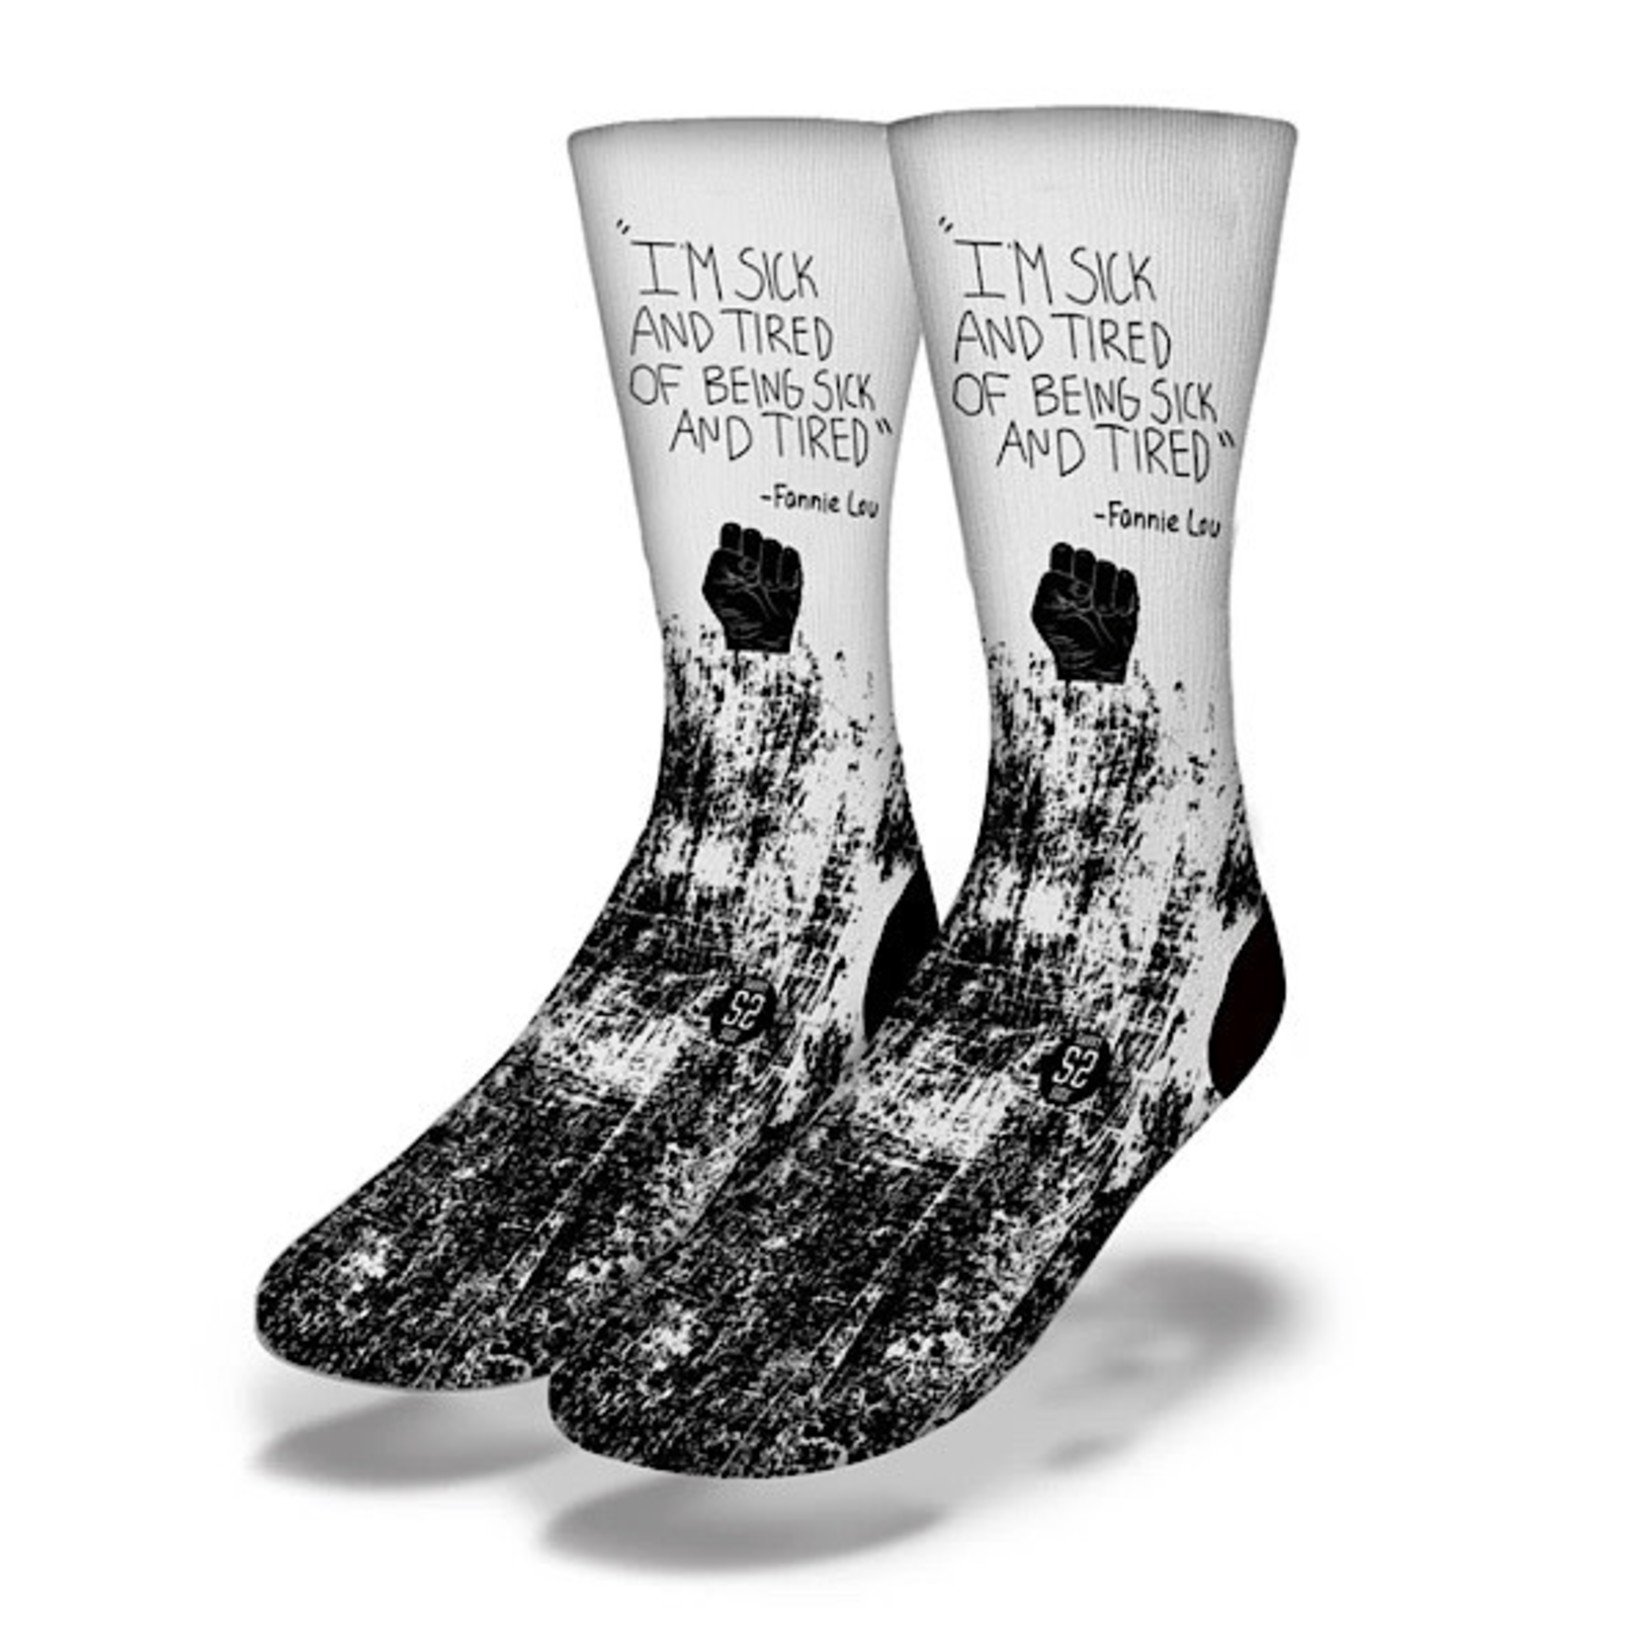 Socks (Womens) - Sick And Tired Of Being Sick And Tired - Fannie Lou